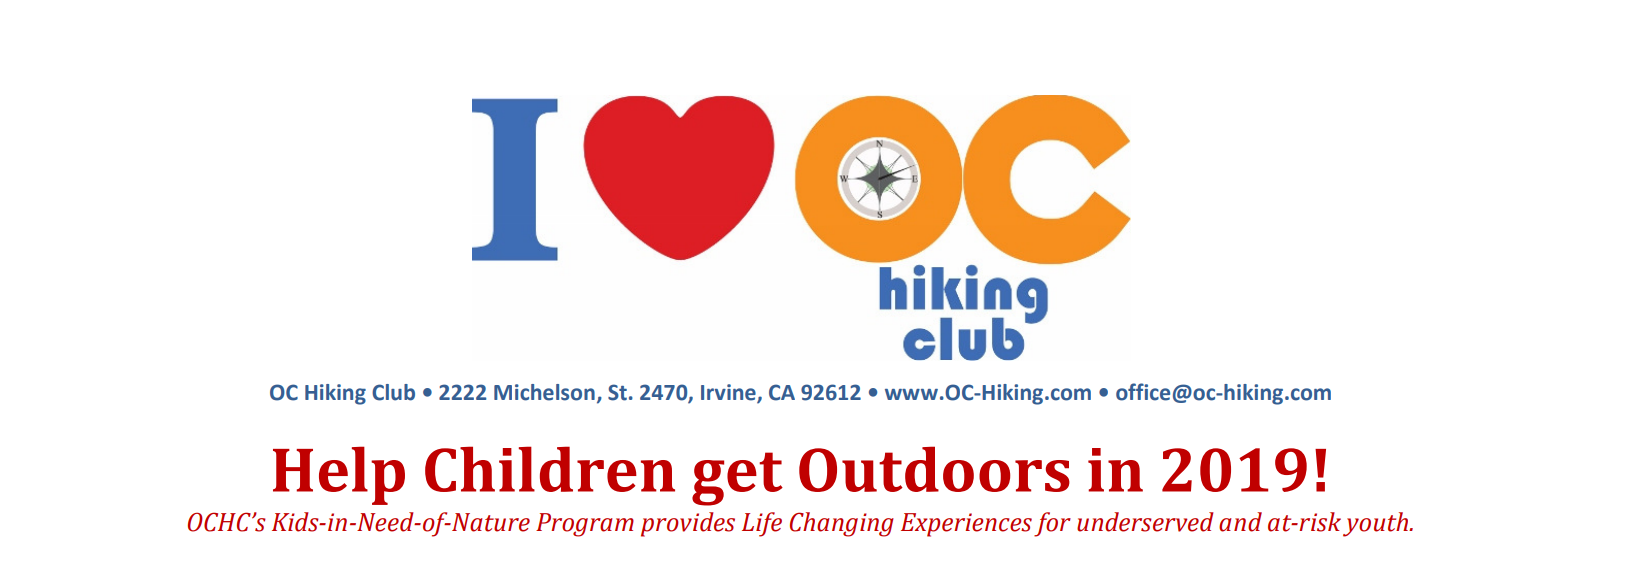 Help to Get More Children Outdoors in 2019